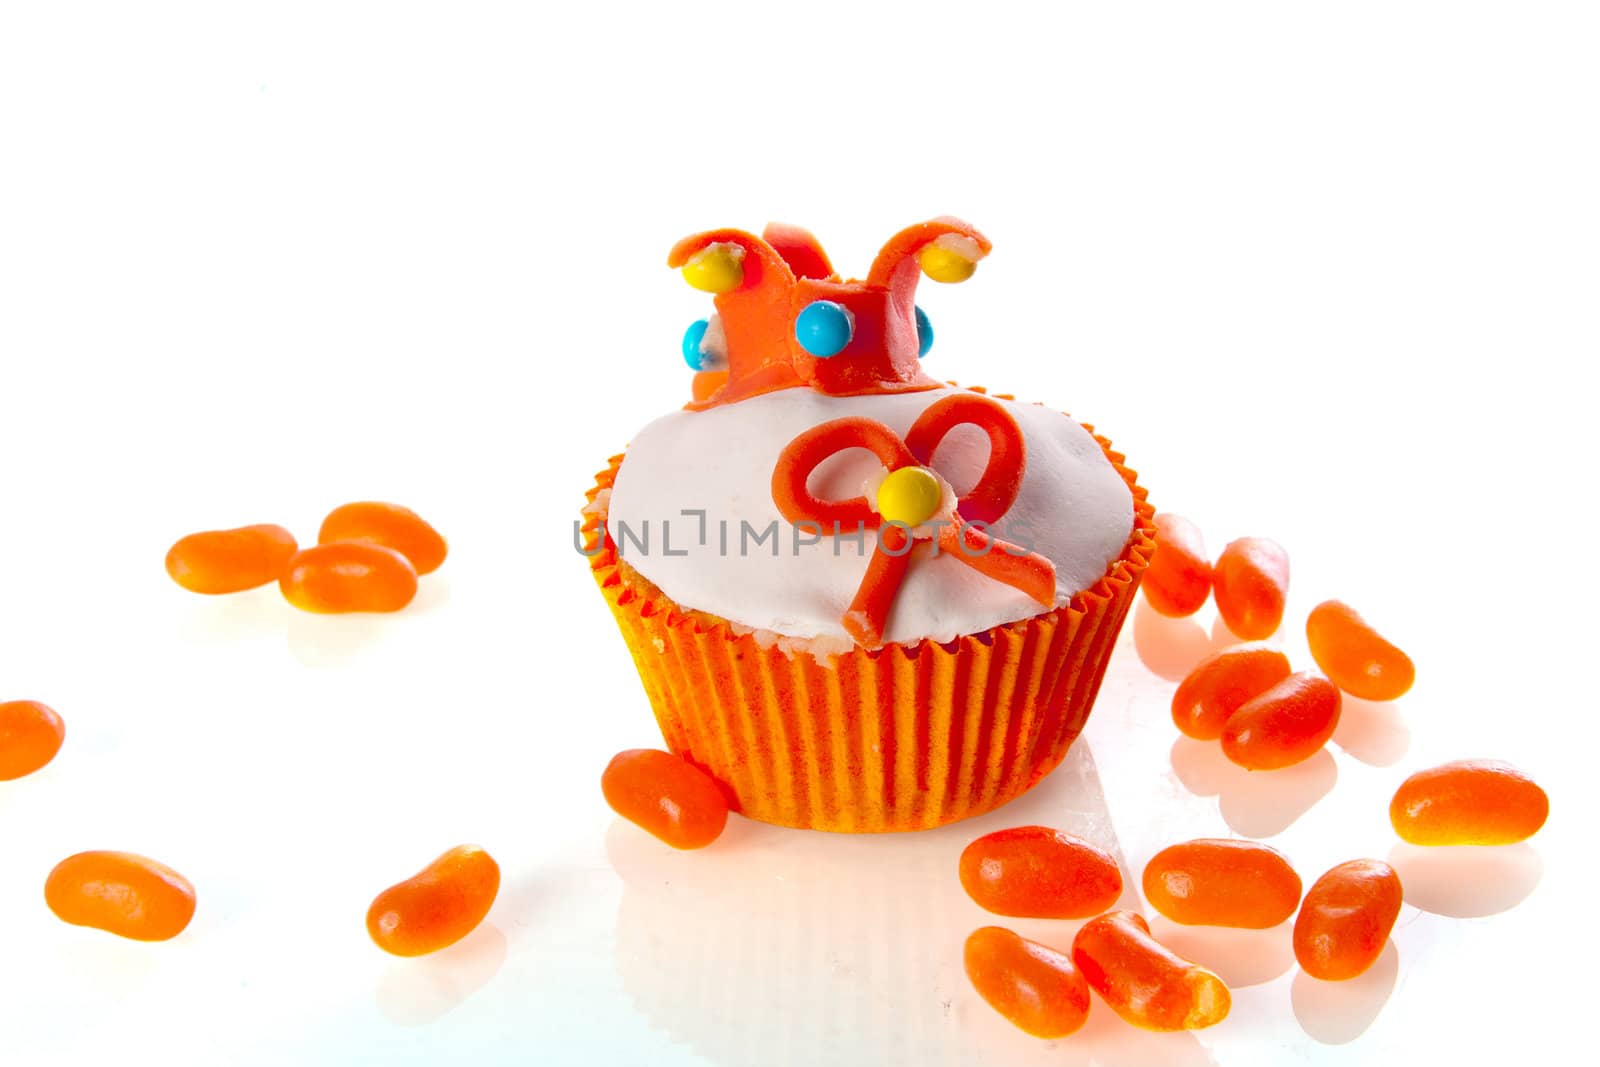 a cupcake with a crown and a orange bow ( symbol of the dutch coronation )